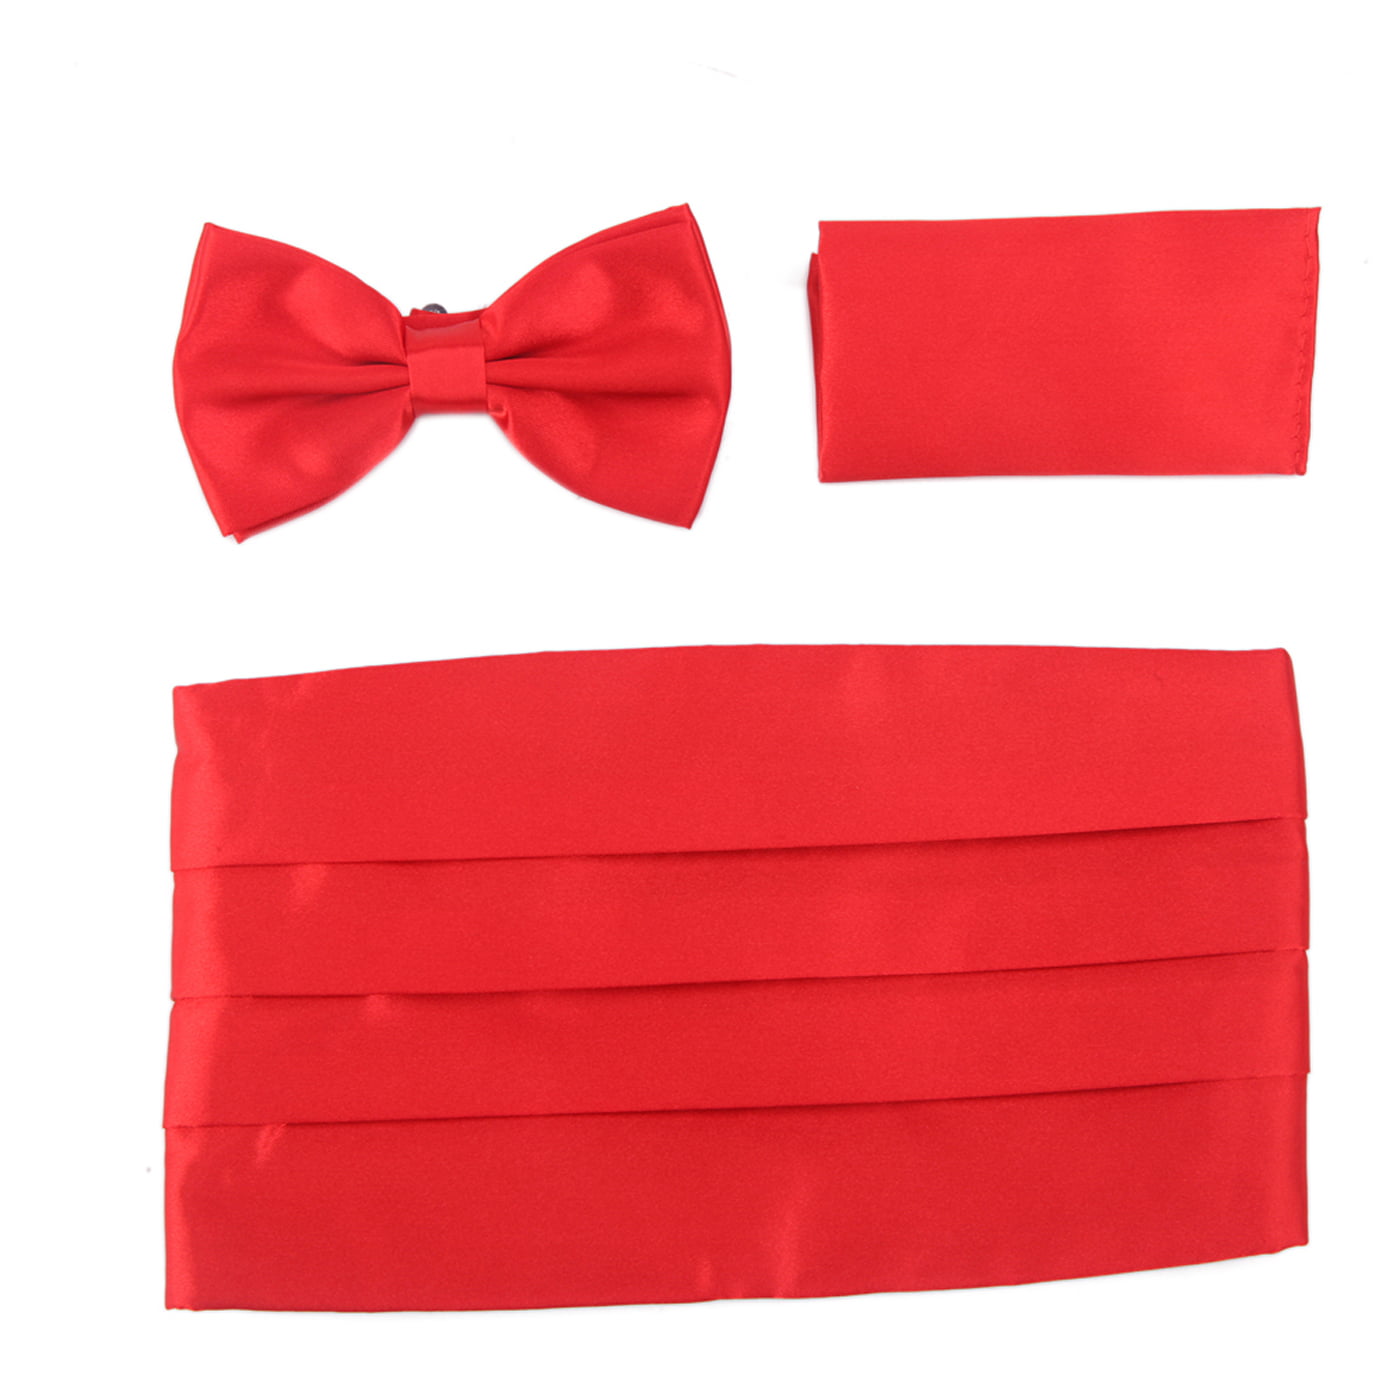 Details about   New men's polyester solid red hankie pocket square formal wedding party prom